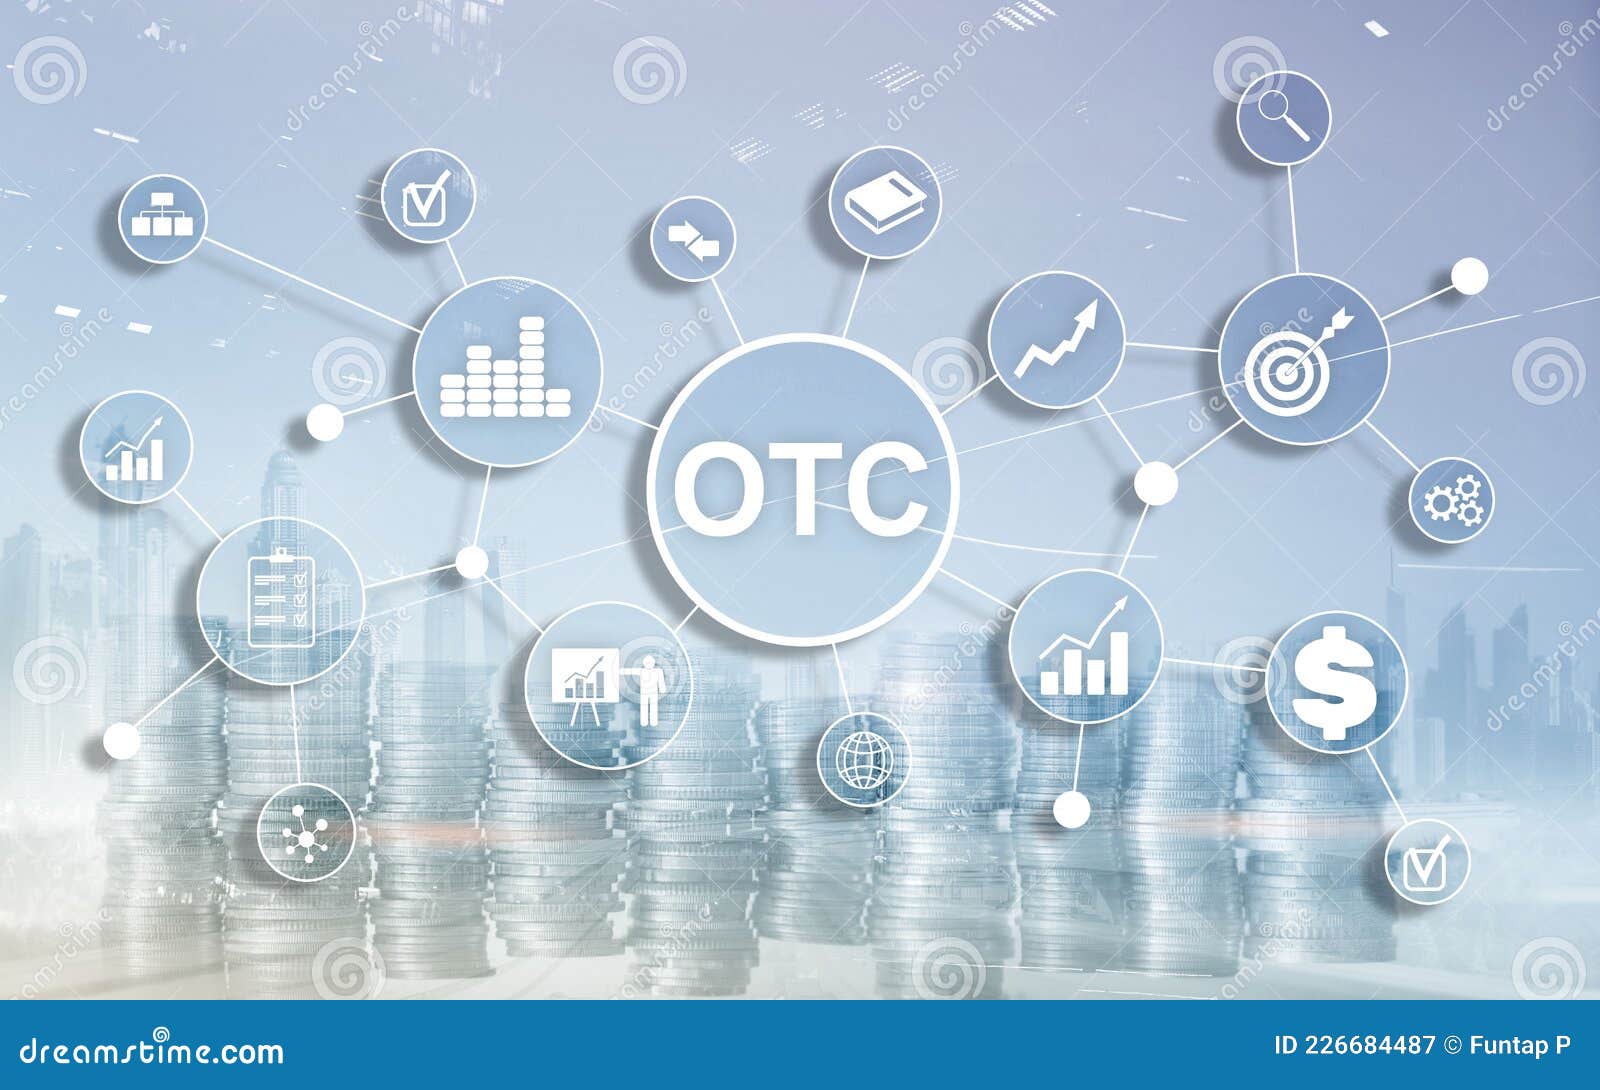 over the counter. otc. trading stock market concept